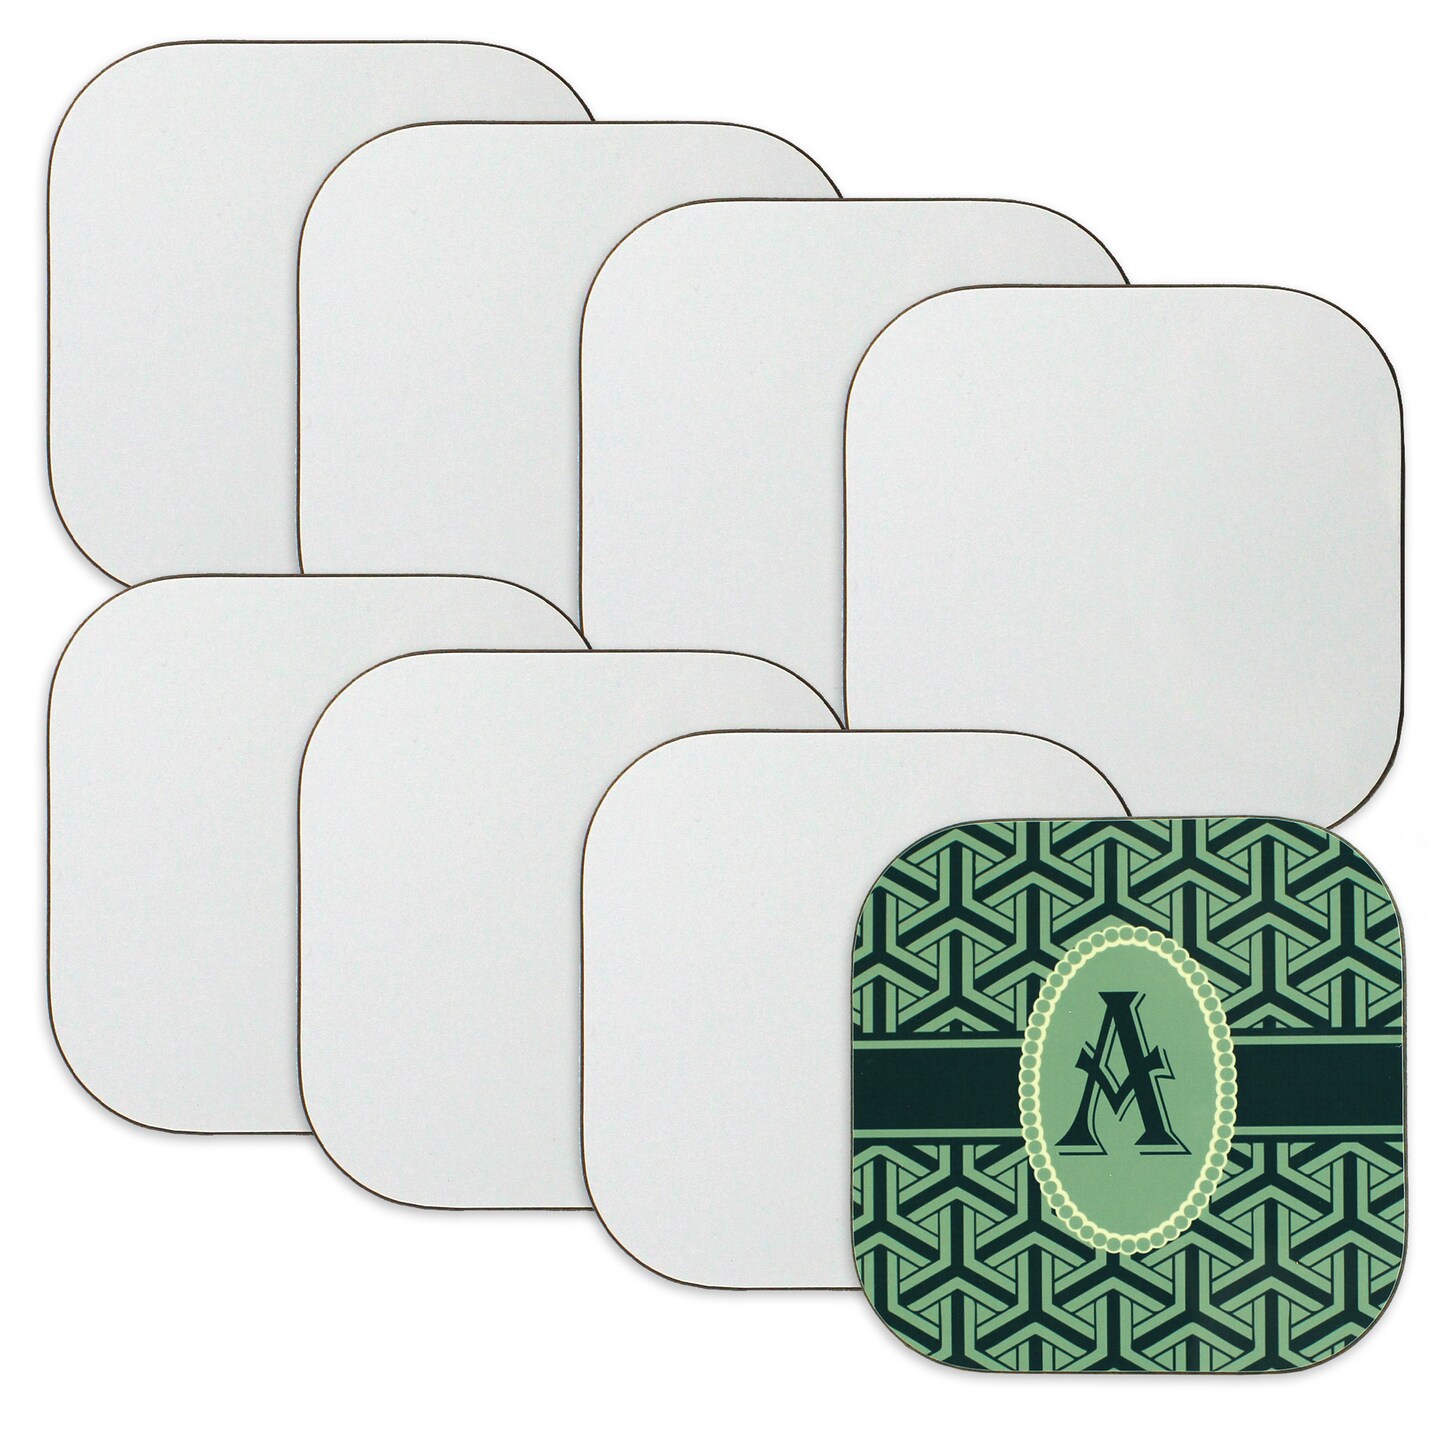 Square cardboard coasters for sublimation